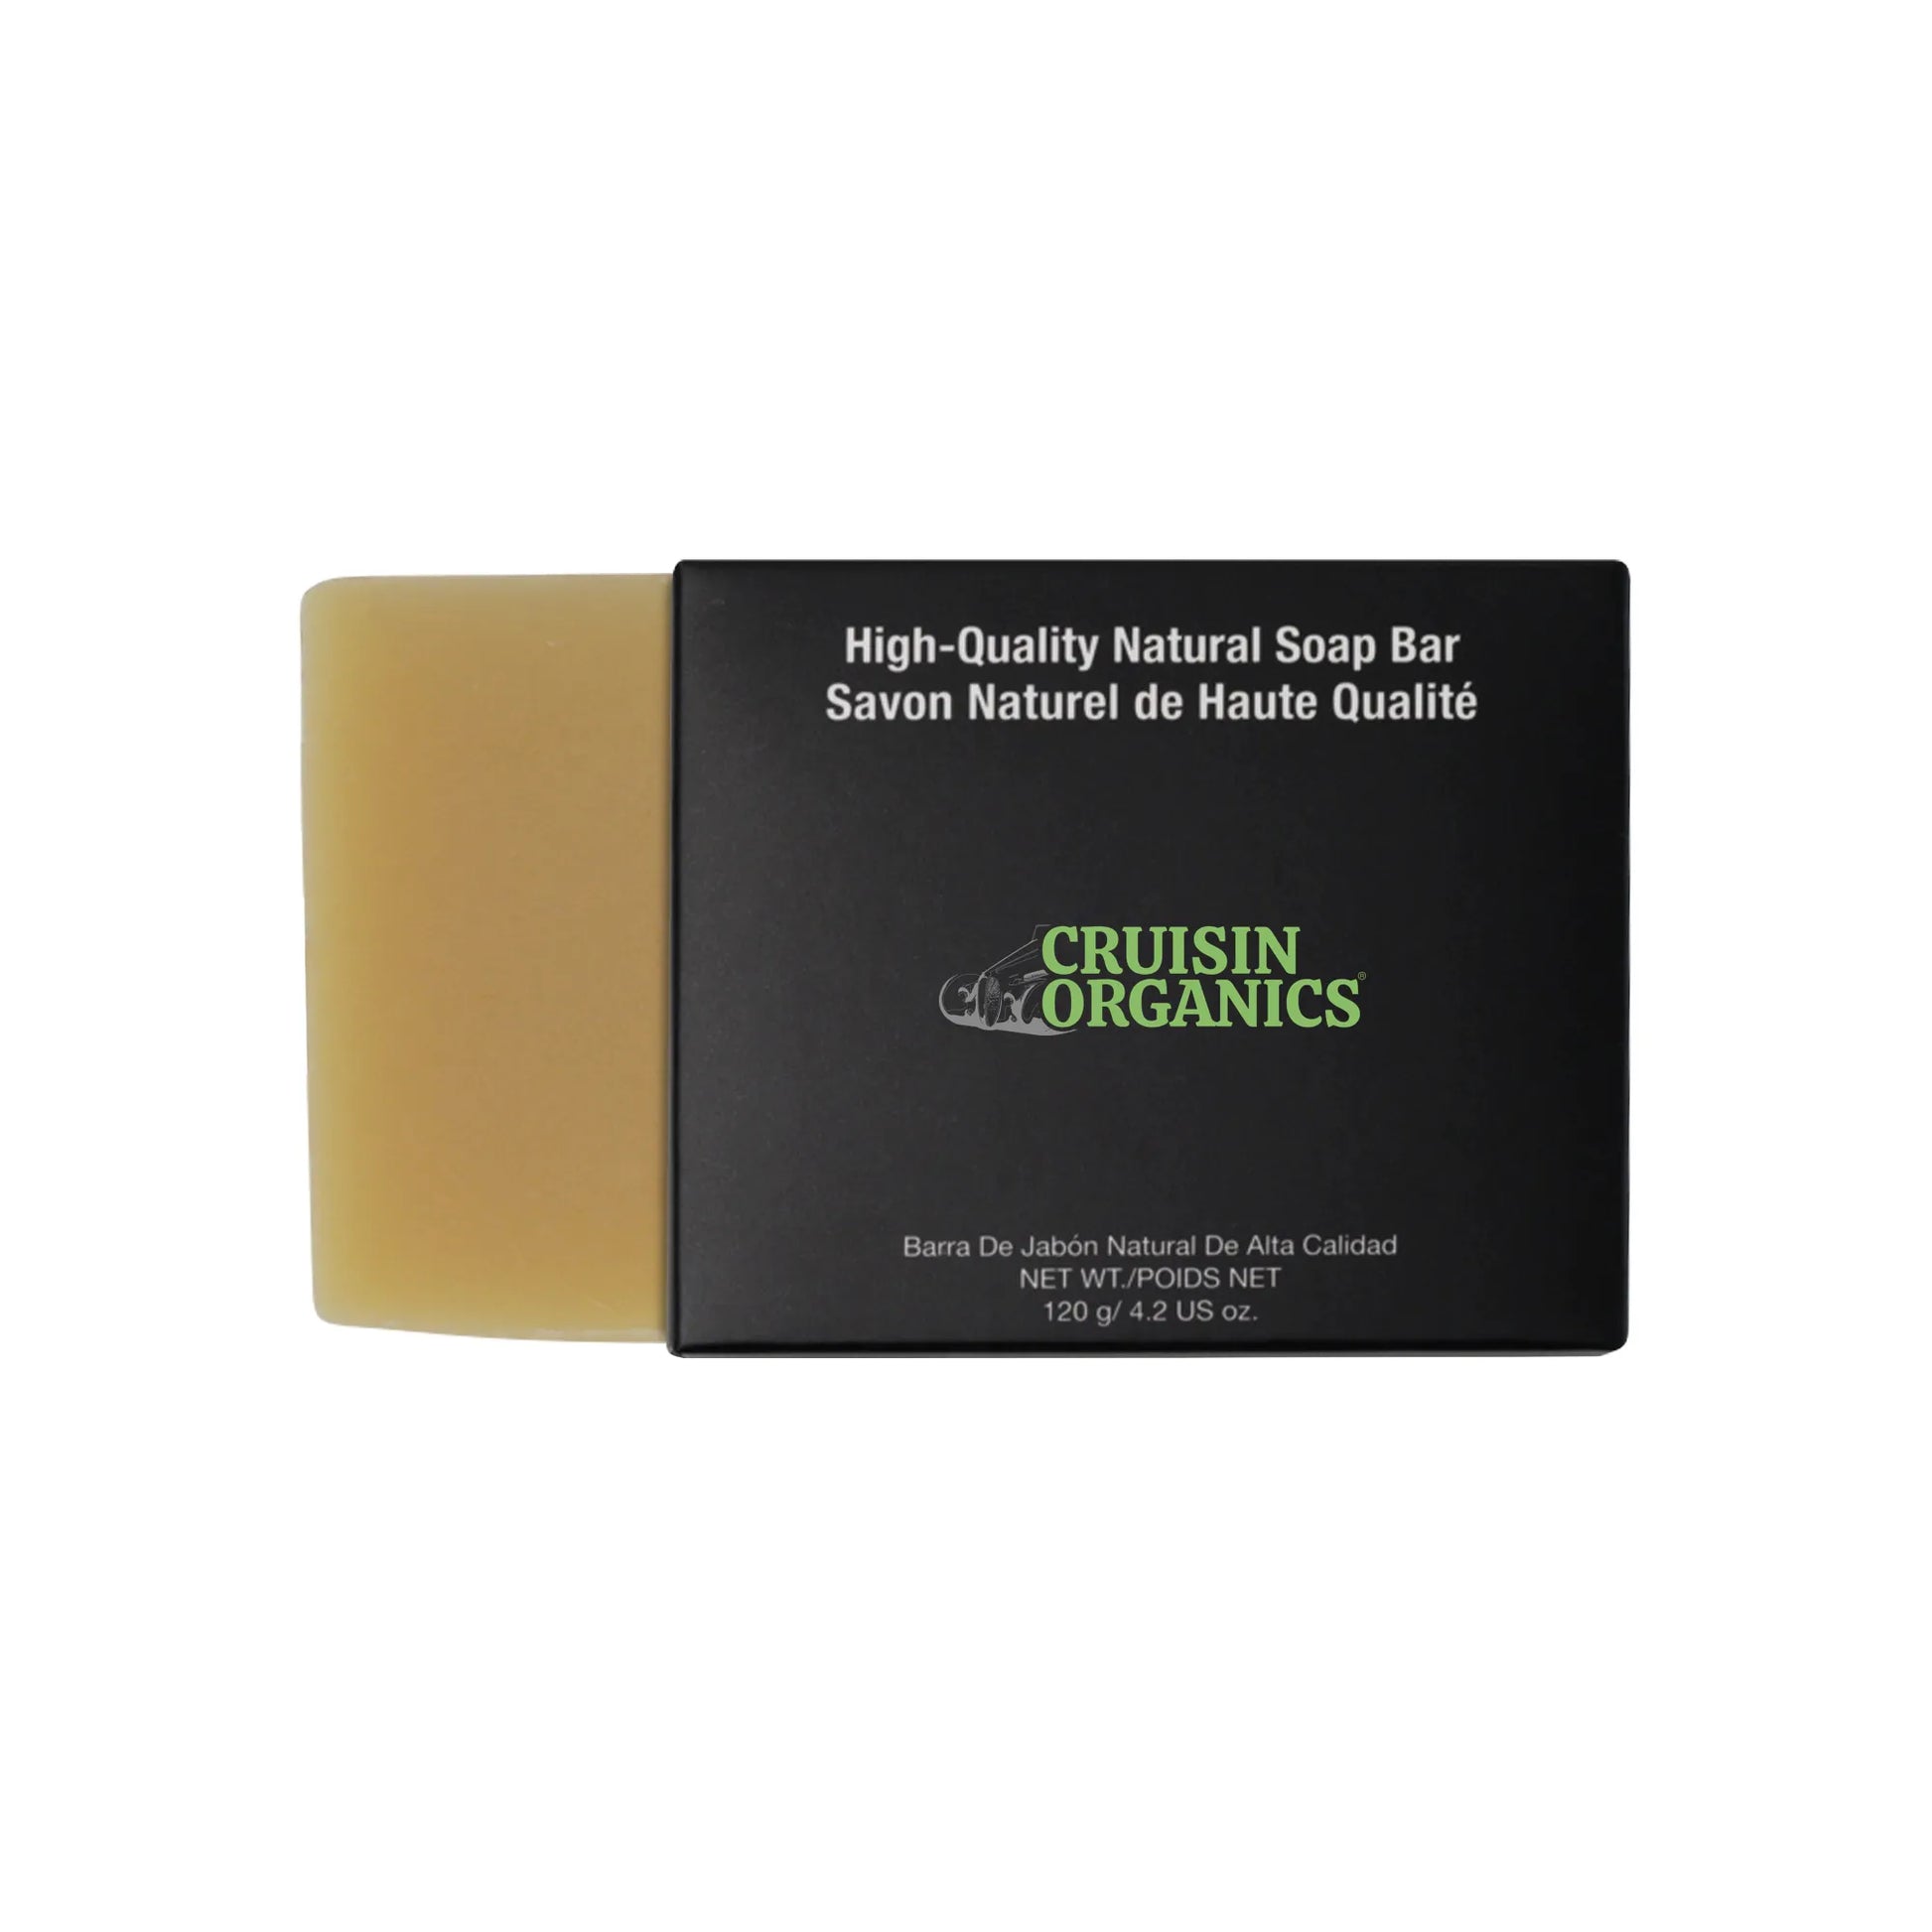 Cruisin Organics Basil Blast Soap A soft blend of basil and neem, this soap works wonders to help you achieve clearer skin. With a small but mighty amount of neem oil, it is the superpower of collagen production for bouncier skin, all the while controlling excessive oiliness for acne-prone skin. With the right amount of natural basil oil, its properties nourish, repair, and brighten skin complexions with a single use. Feel the power of basil and neem with this lavish soap bar.